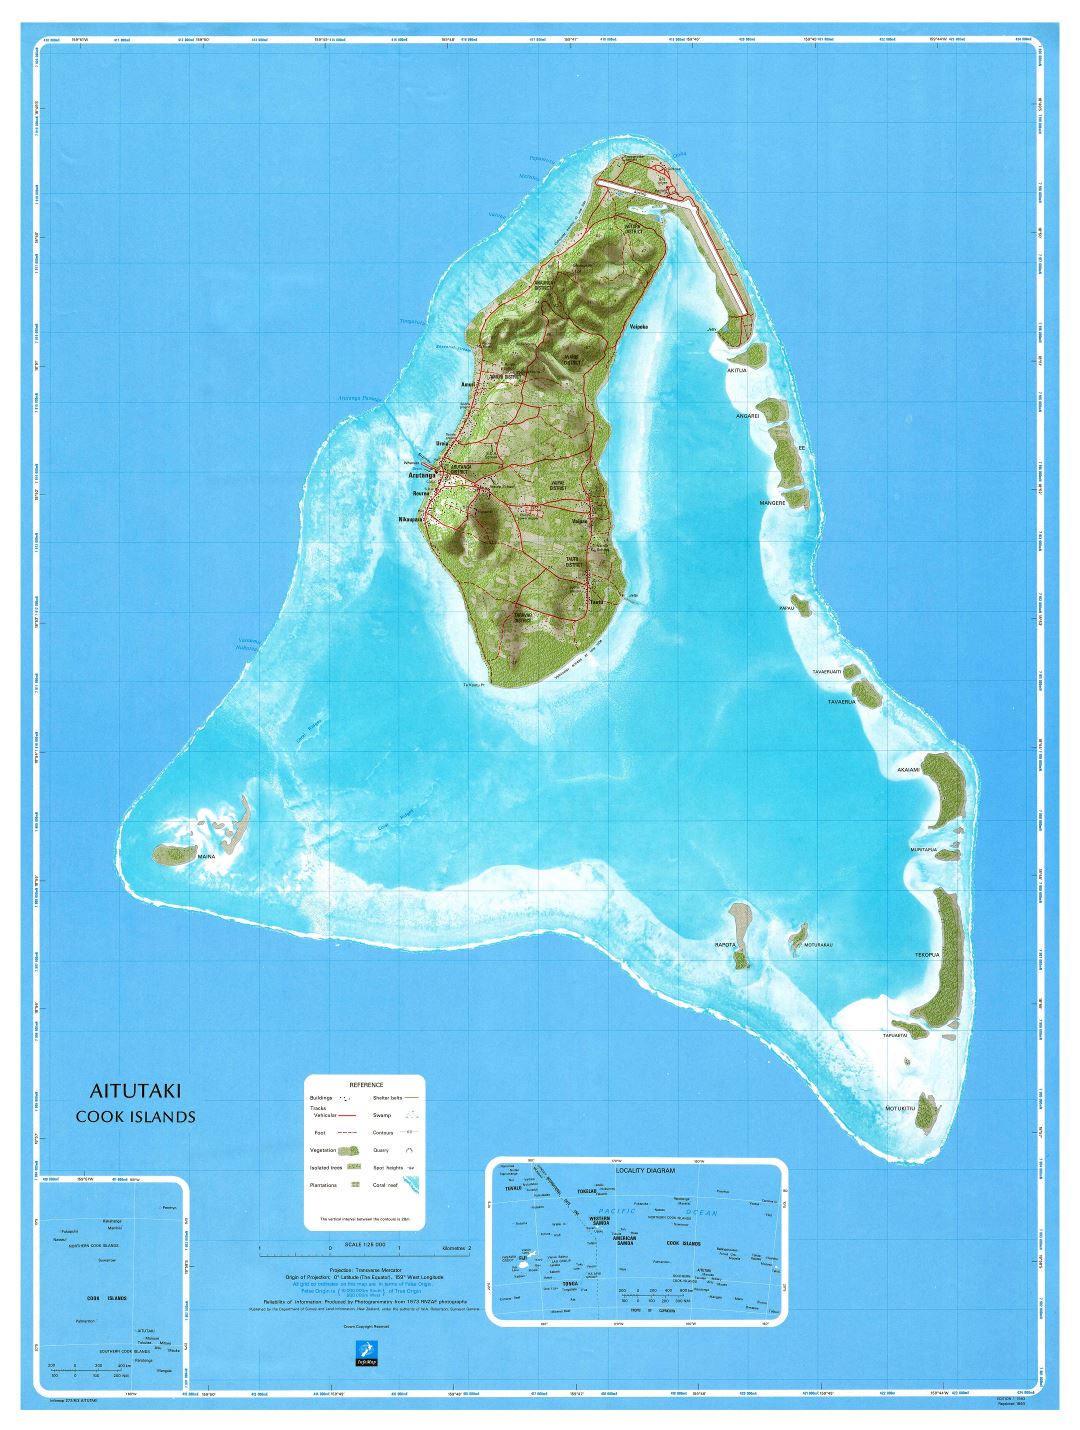 Large scale topographical map of Aitutaki Island, Cook Islands